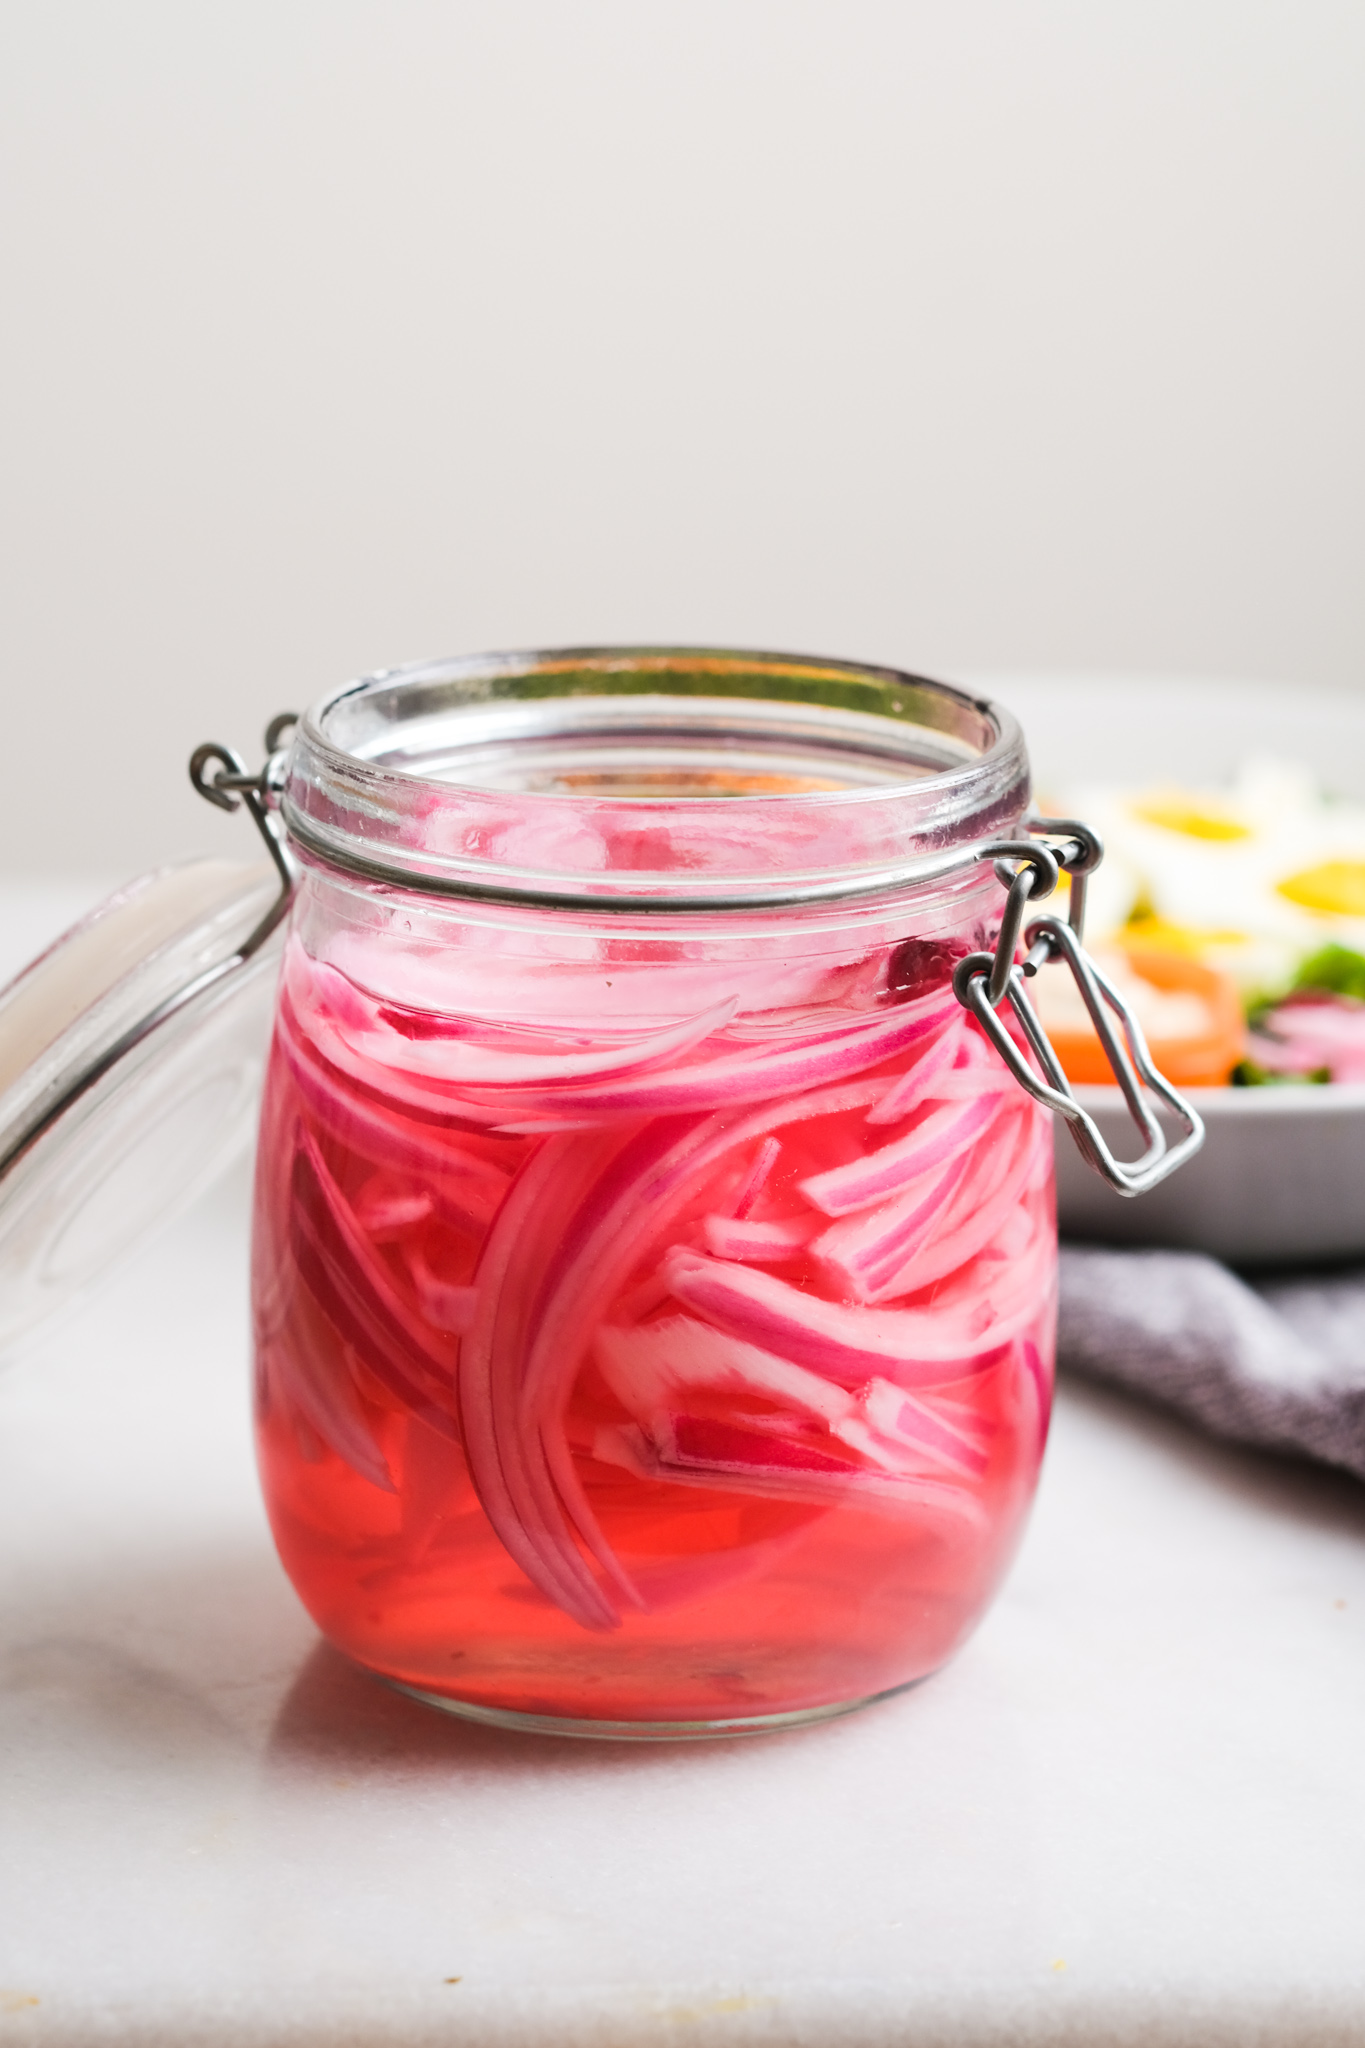 How to Make Quick Pickled Red Onions